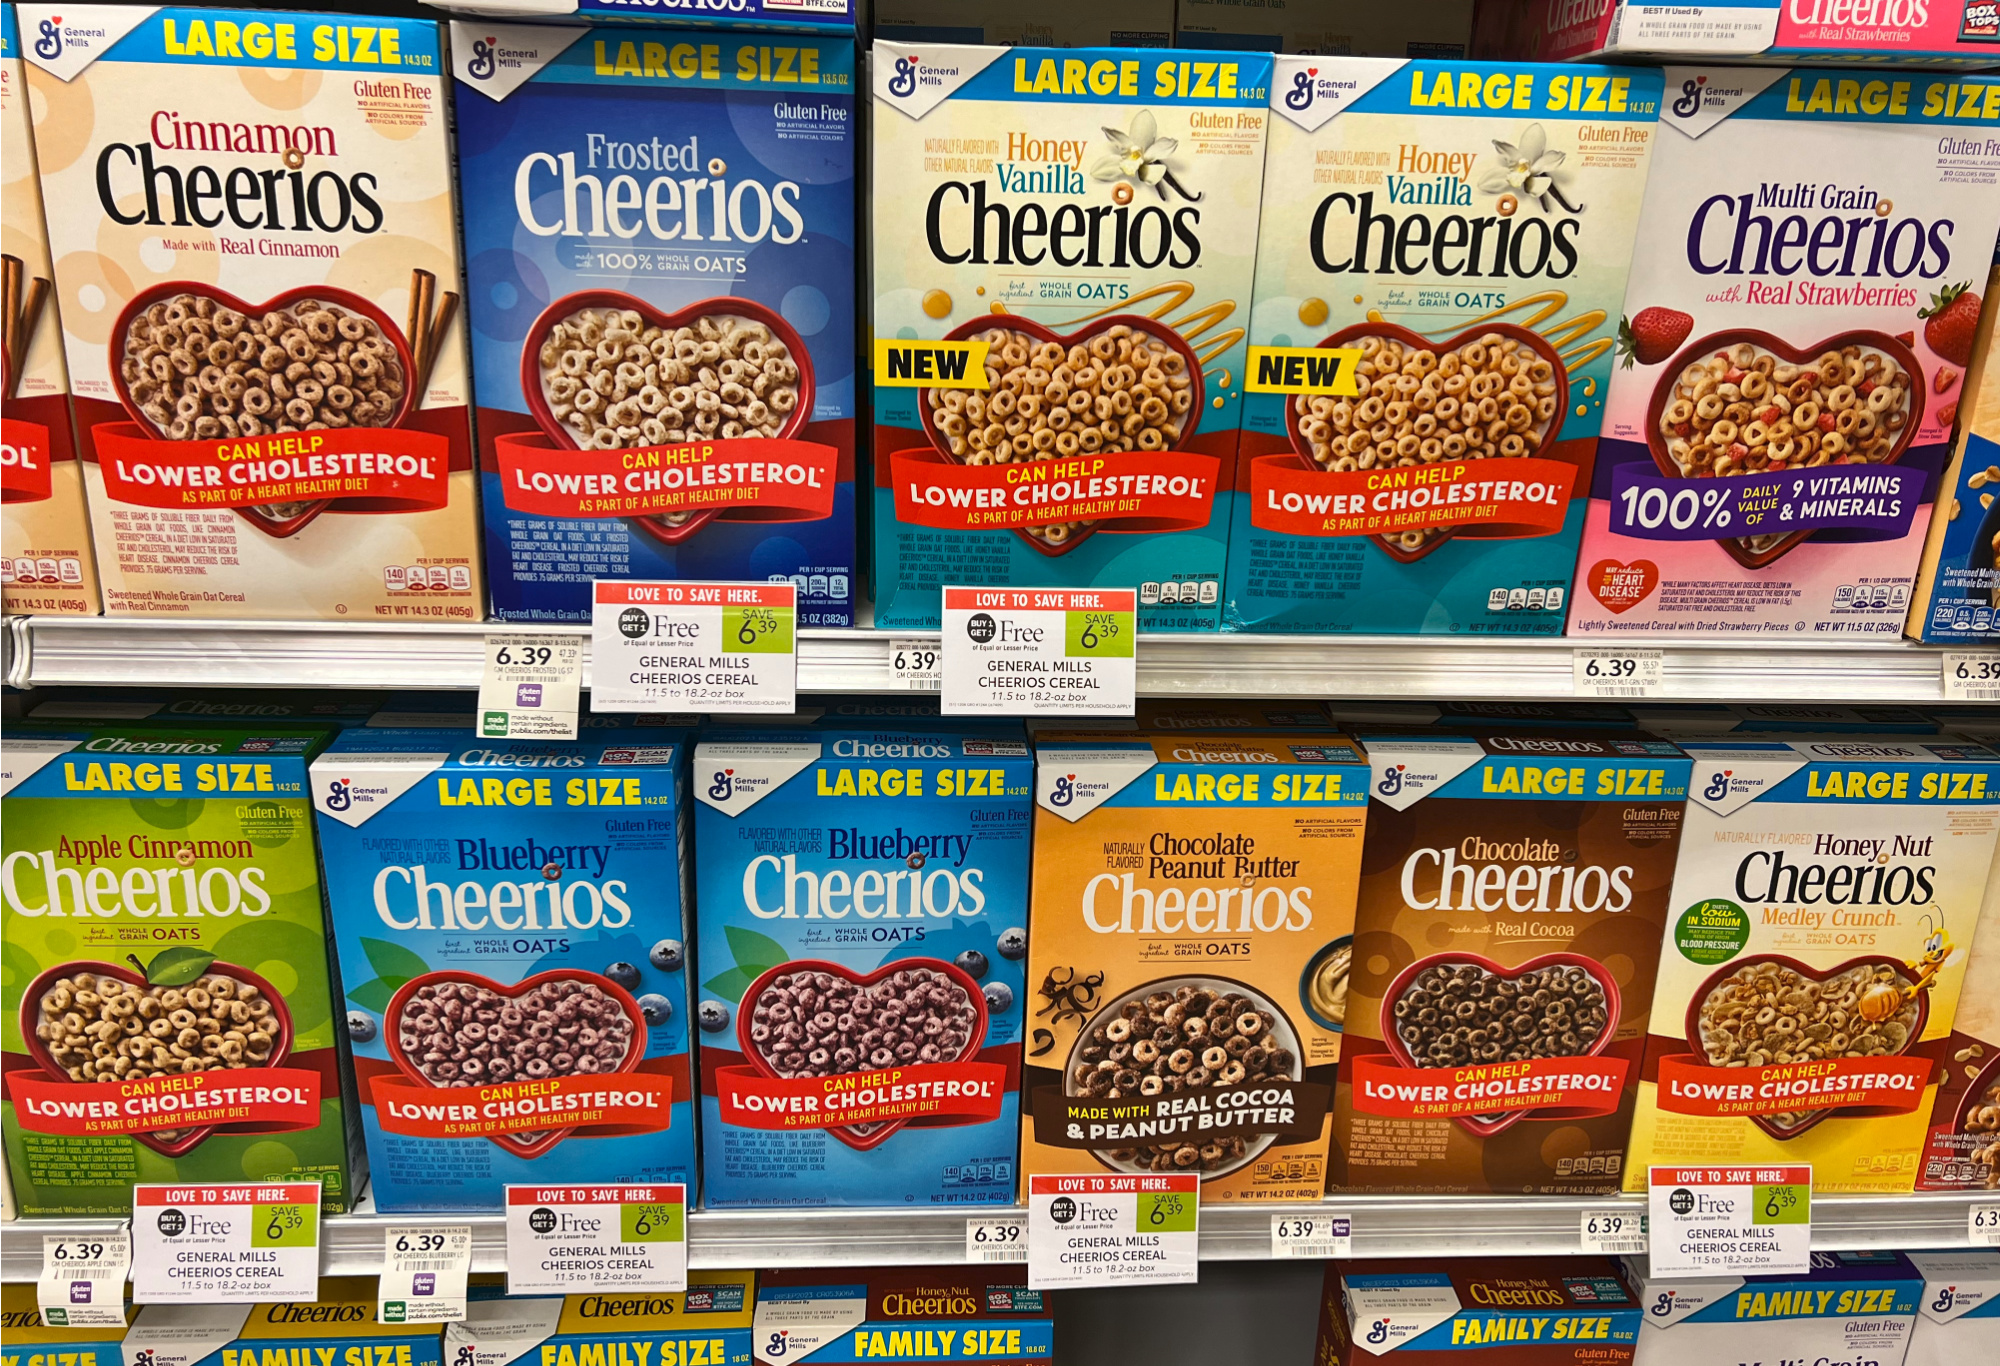 General Mills Cereal As Low As $2.75 At Publix - iHeartPublix